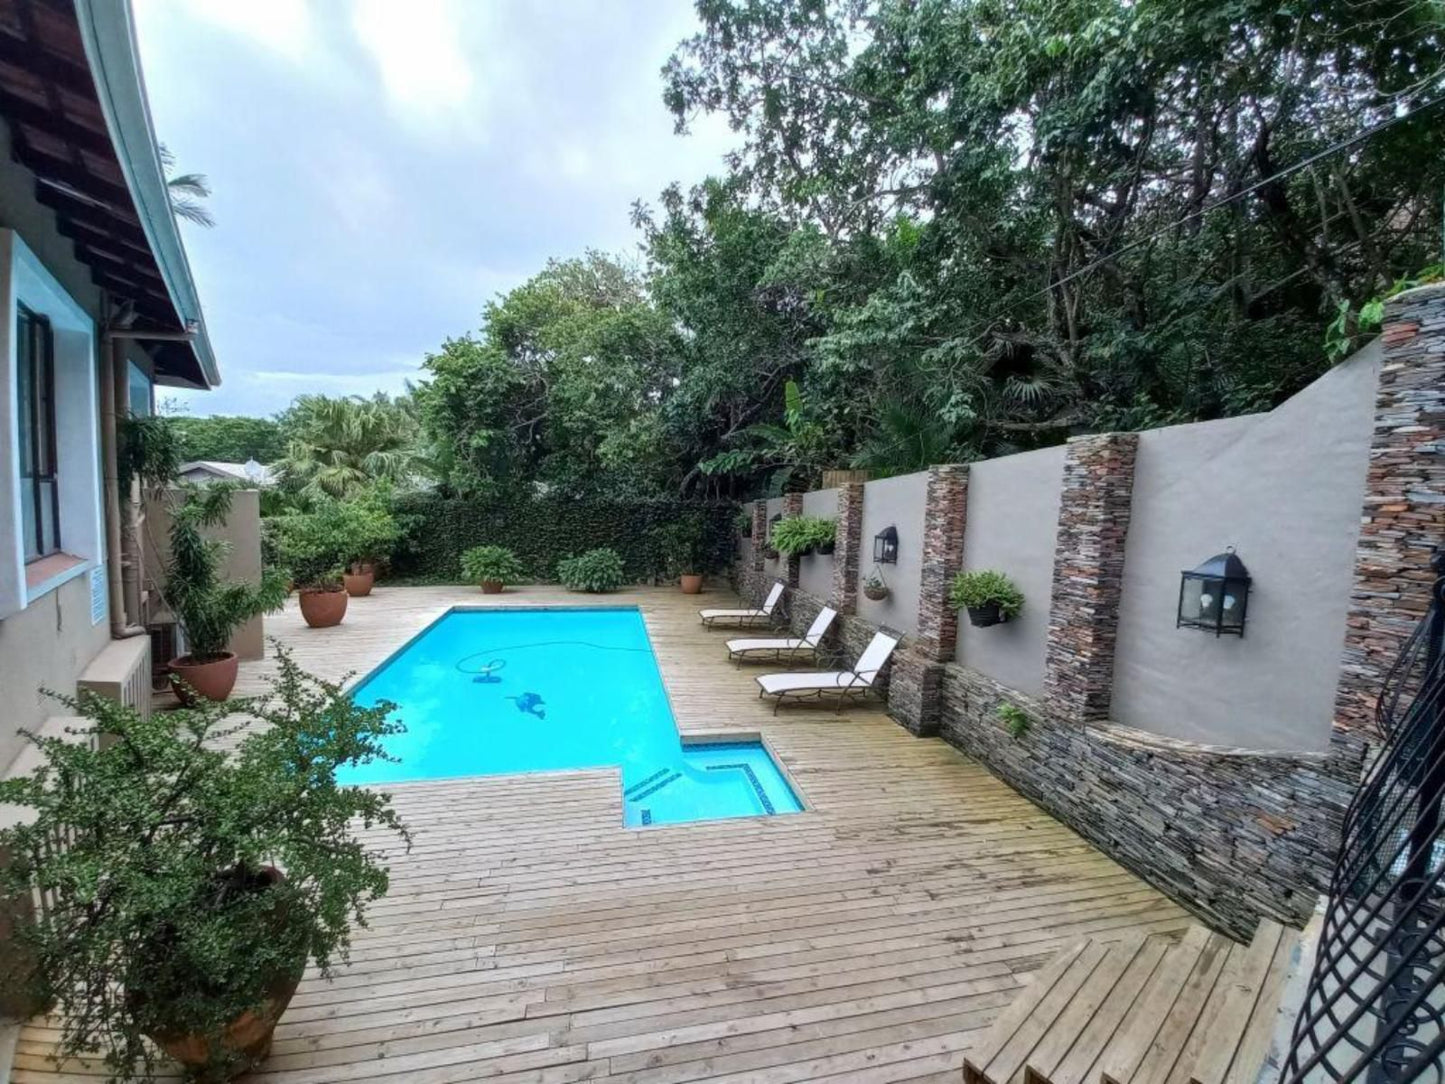 2 On Valley Villa Umhlali Beach Ballito Kwazulu Natal South Africa House, Building, Architecture, Garden, Nature, Plant, Swimming Pool